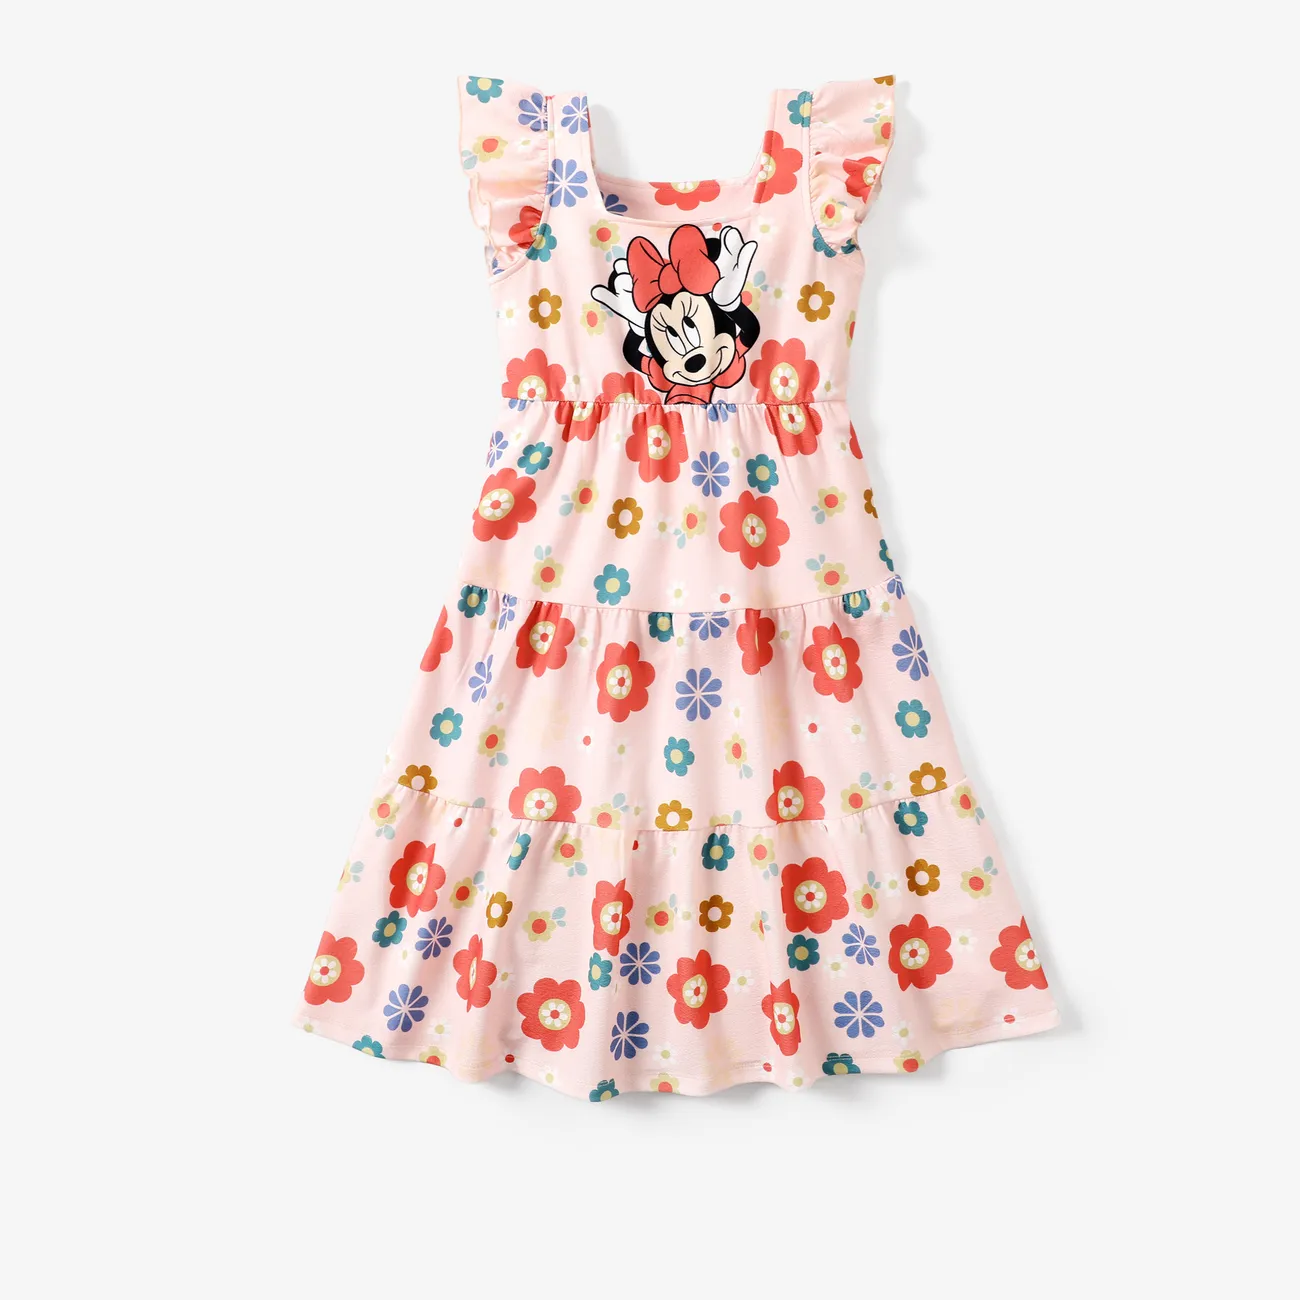 Disney Mickey and Friends 1 pc Kid Girl Character Print Floral Ruffled-Sleeve Dress Pink big image 1